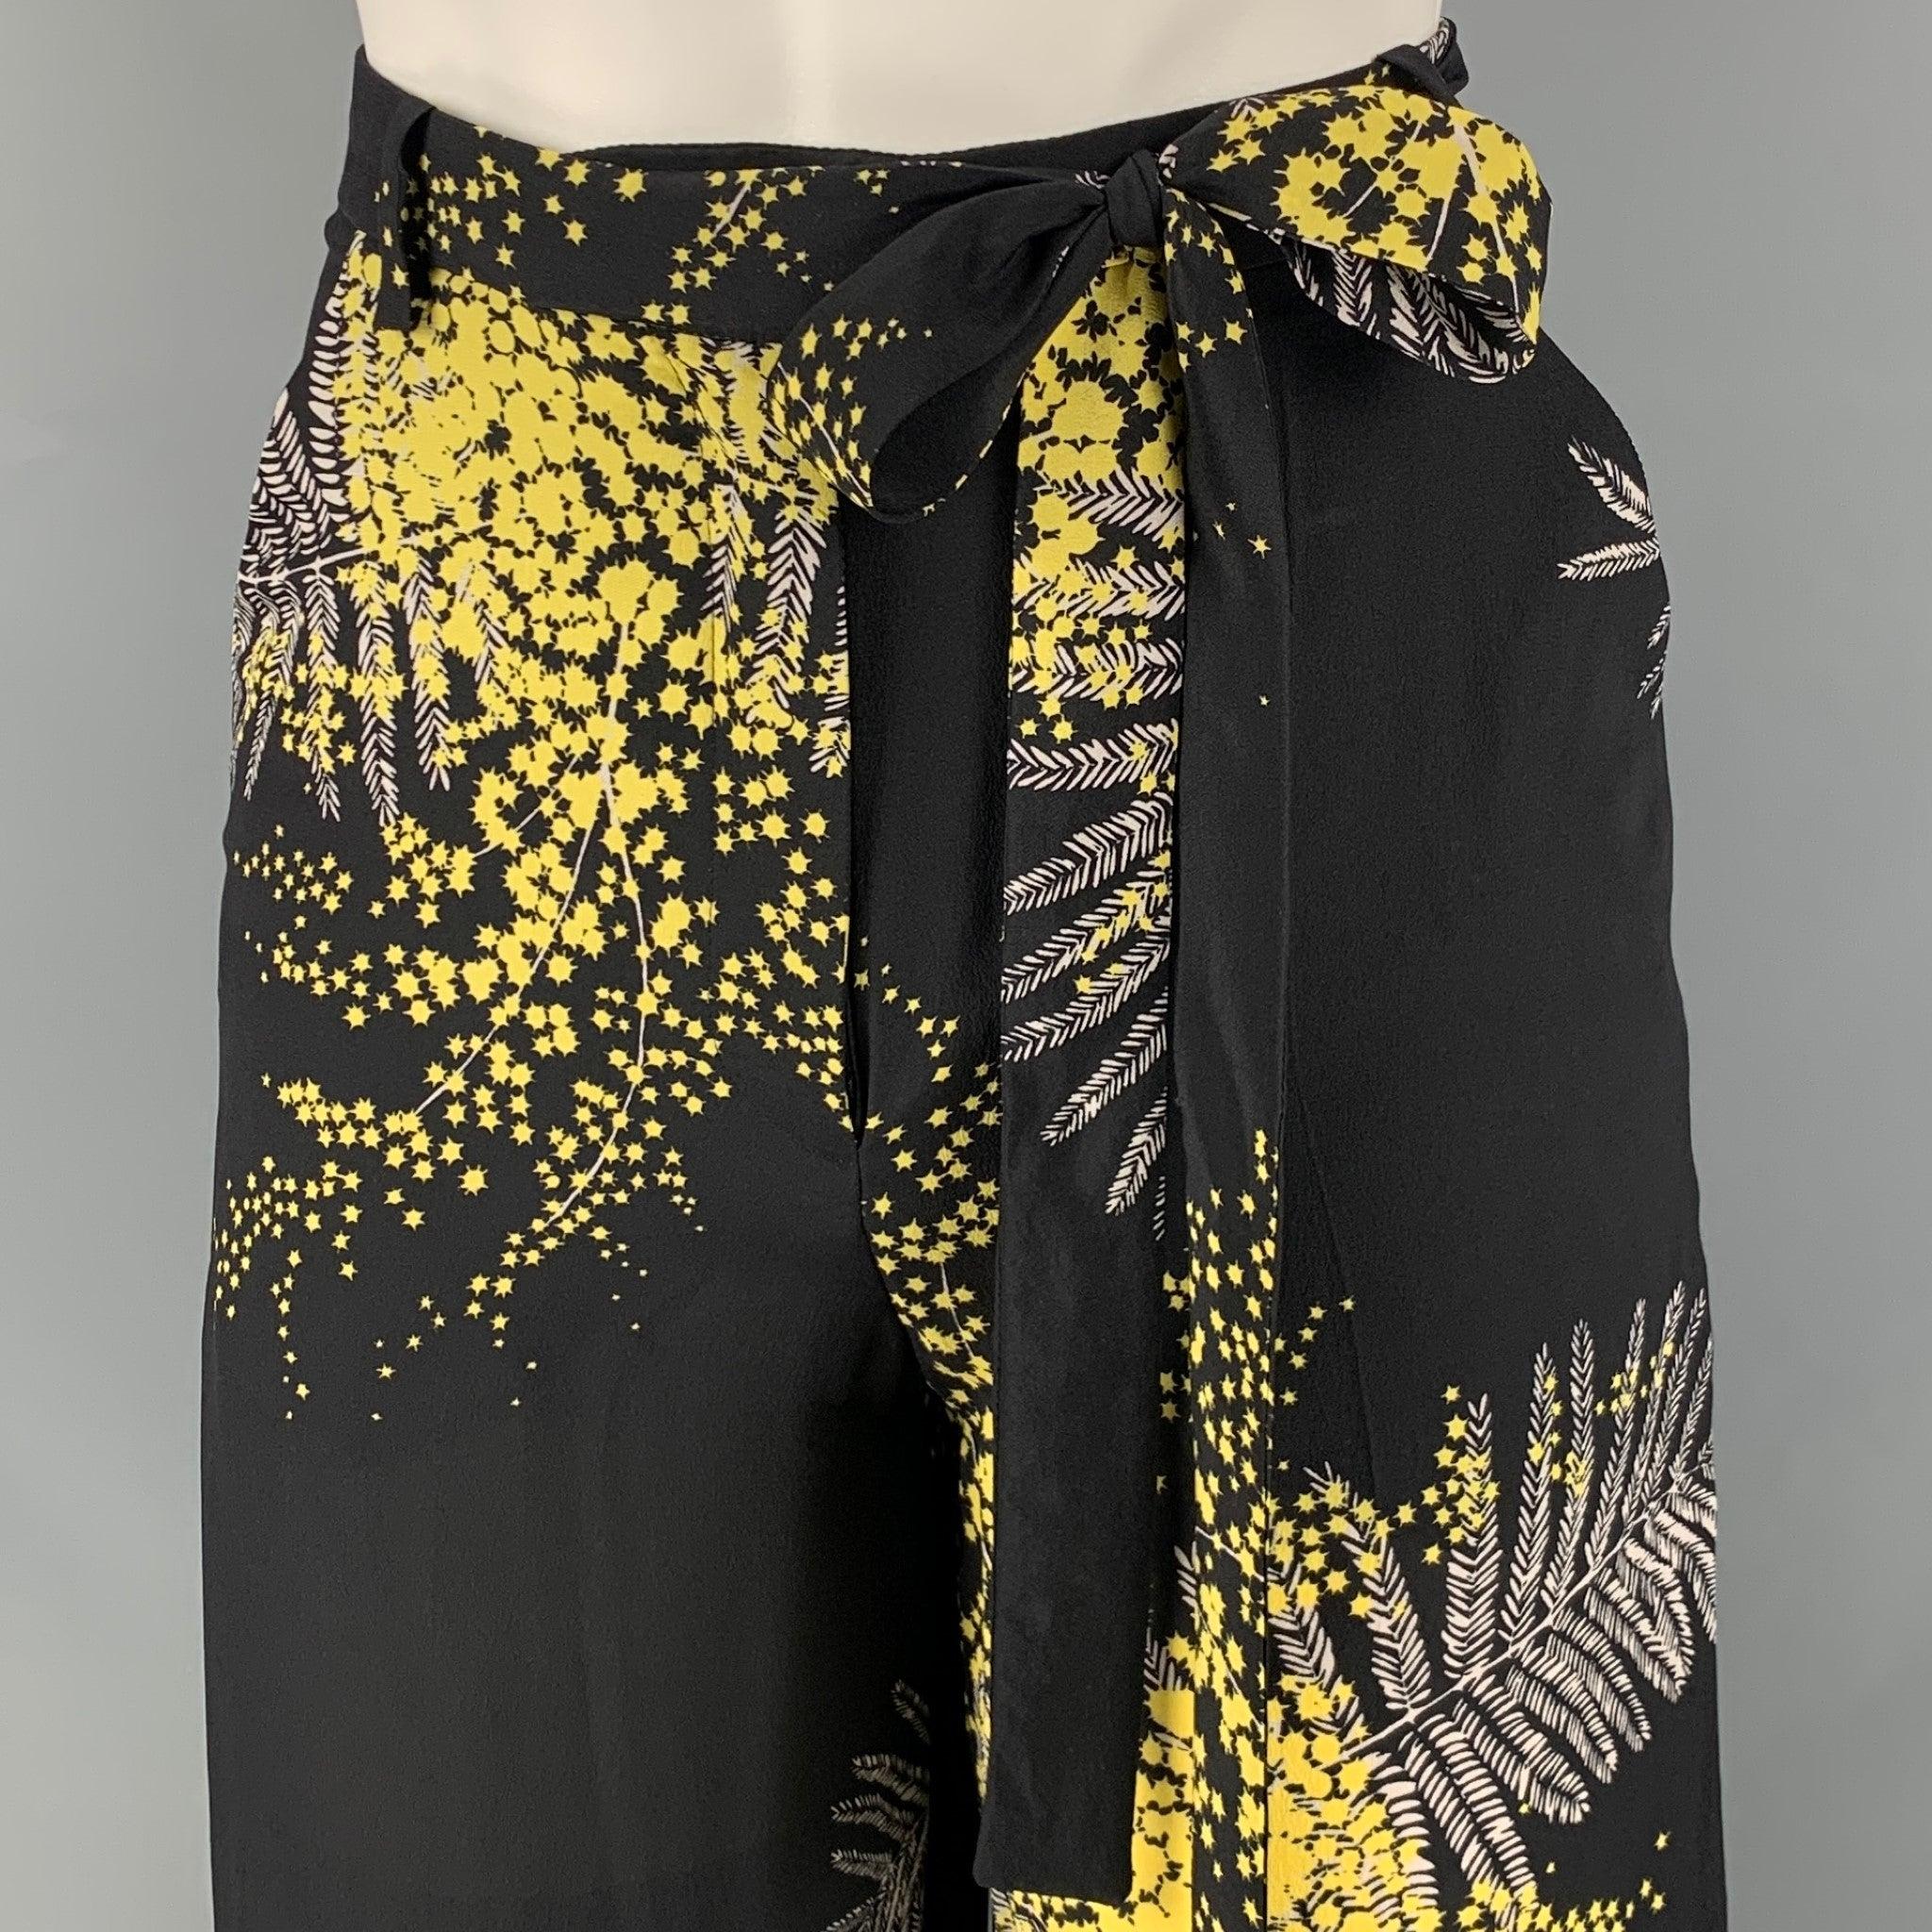 VALENTINO casual pants comes in a black and yellow floral silk featuring a wide leg style, Ti at waistband, high waisted, and a zipper fly closure. Made in Italy.New with Tags. 

Marked:   00 

Measurements: 
  Waist: 25 inches Rise: 12 inches